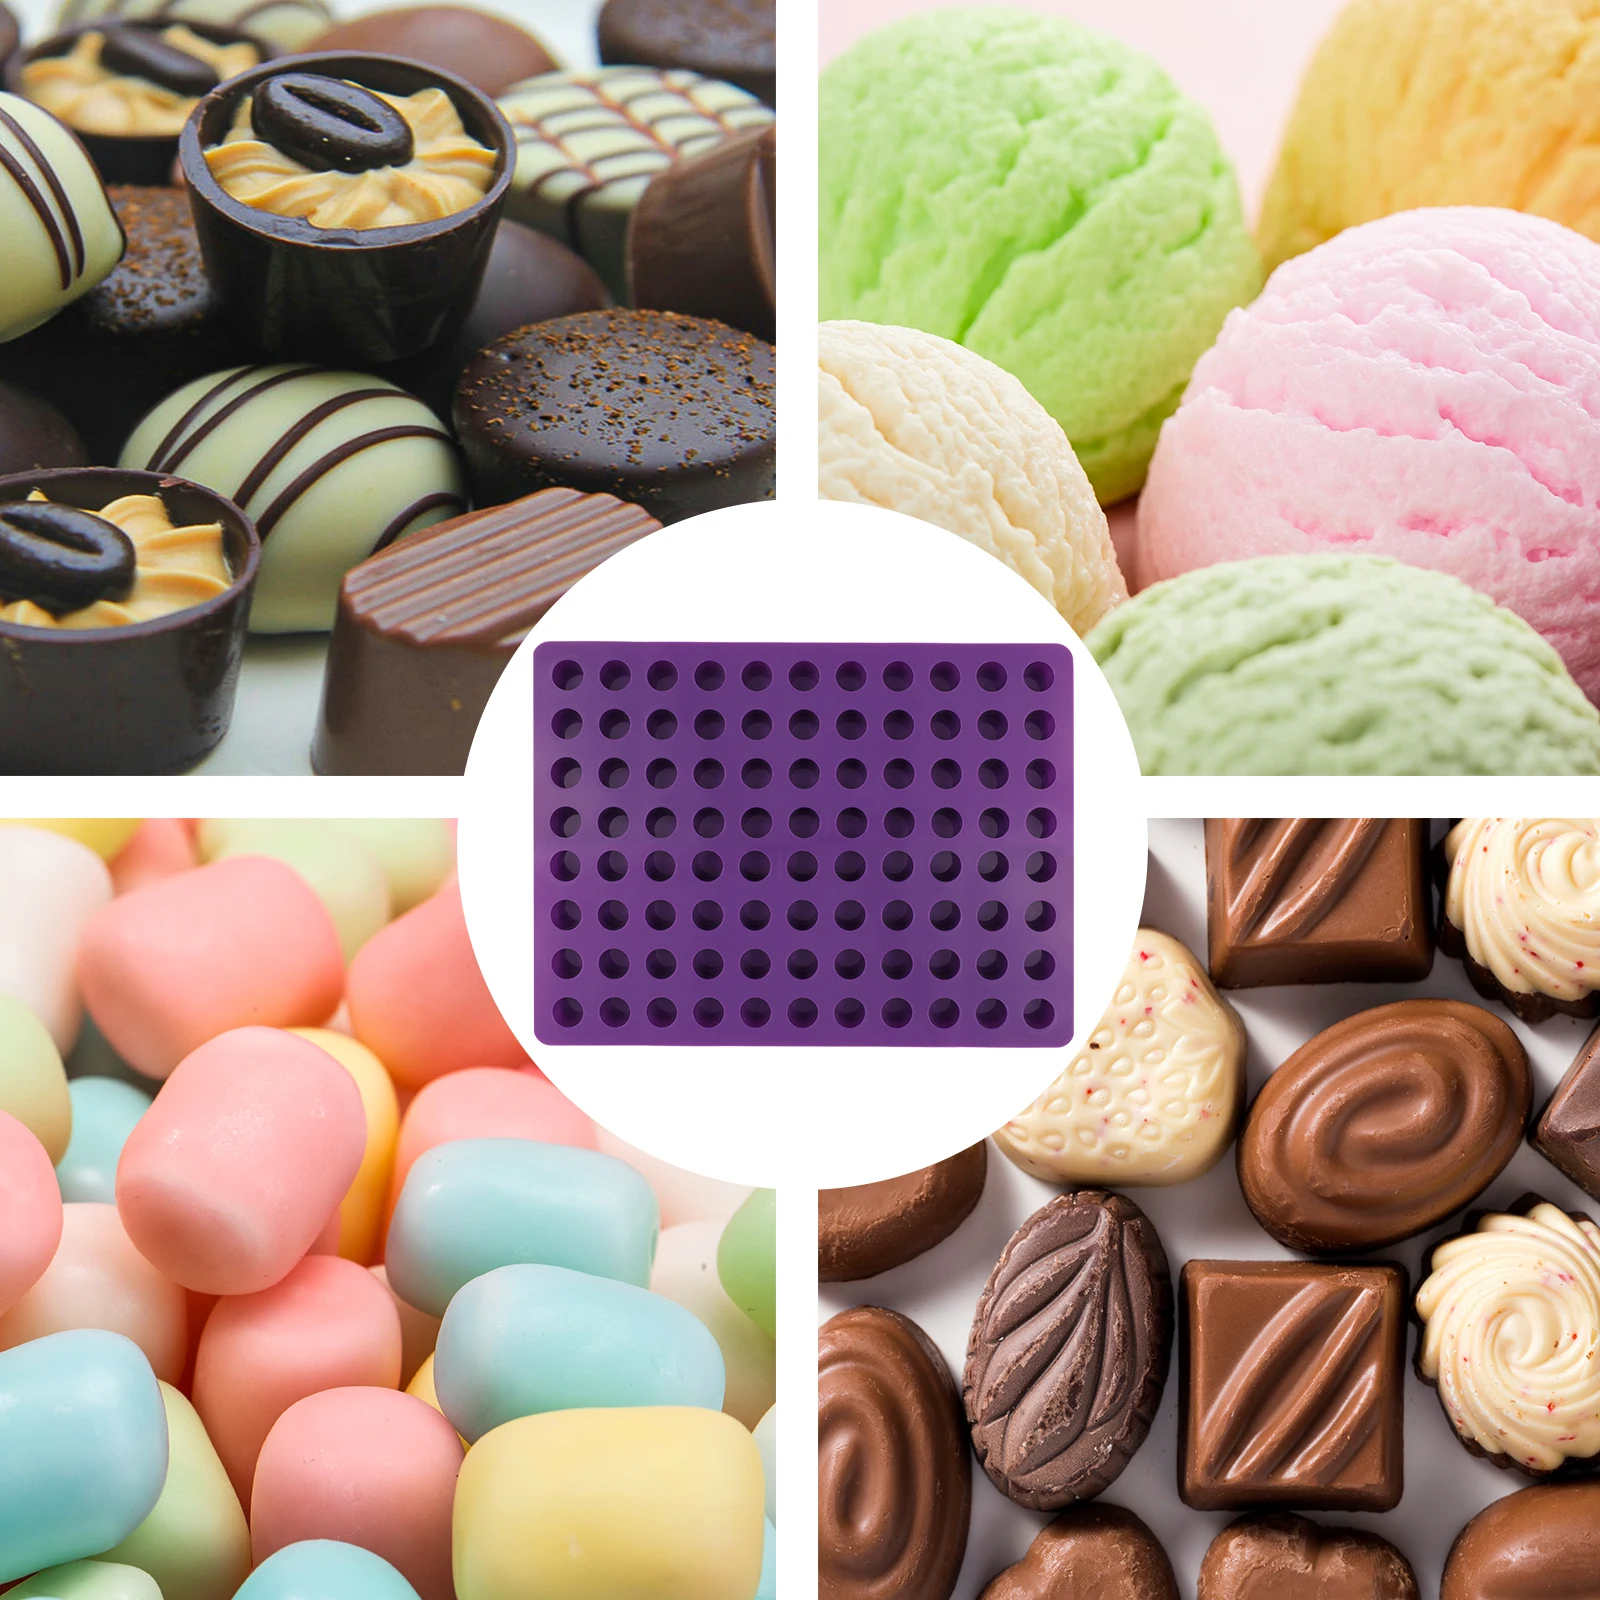 

88 Cavities Mini Round Mini Cheese Cakes Molds Baking Silicone Mold For Pudding Chocolate Truffle Jelly And Candy Ice Mold